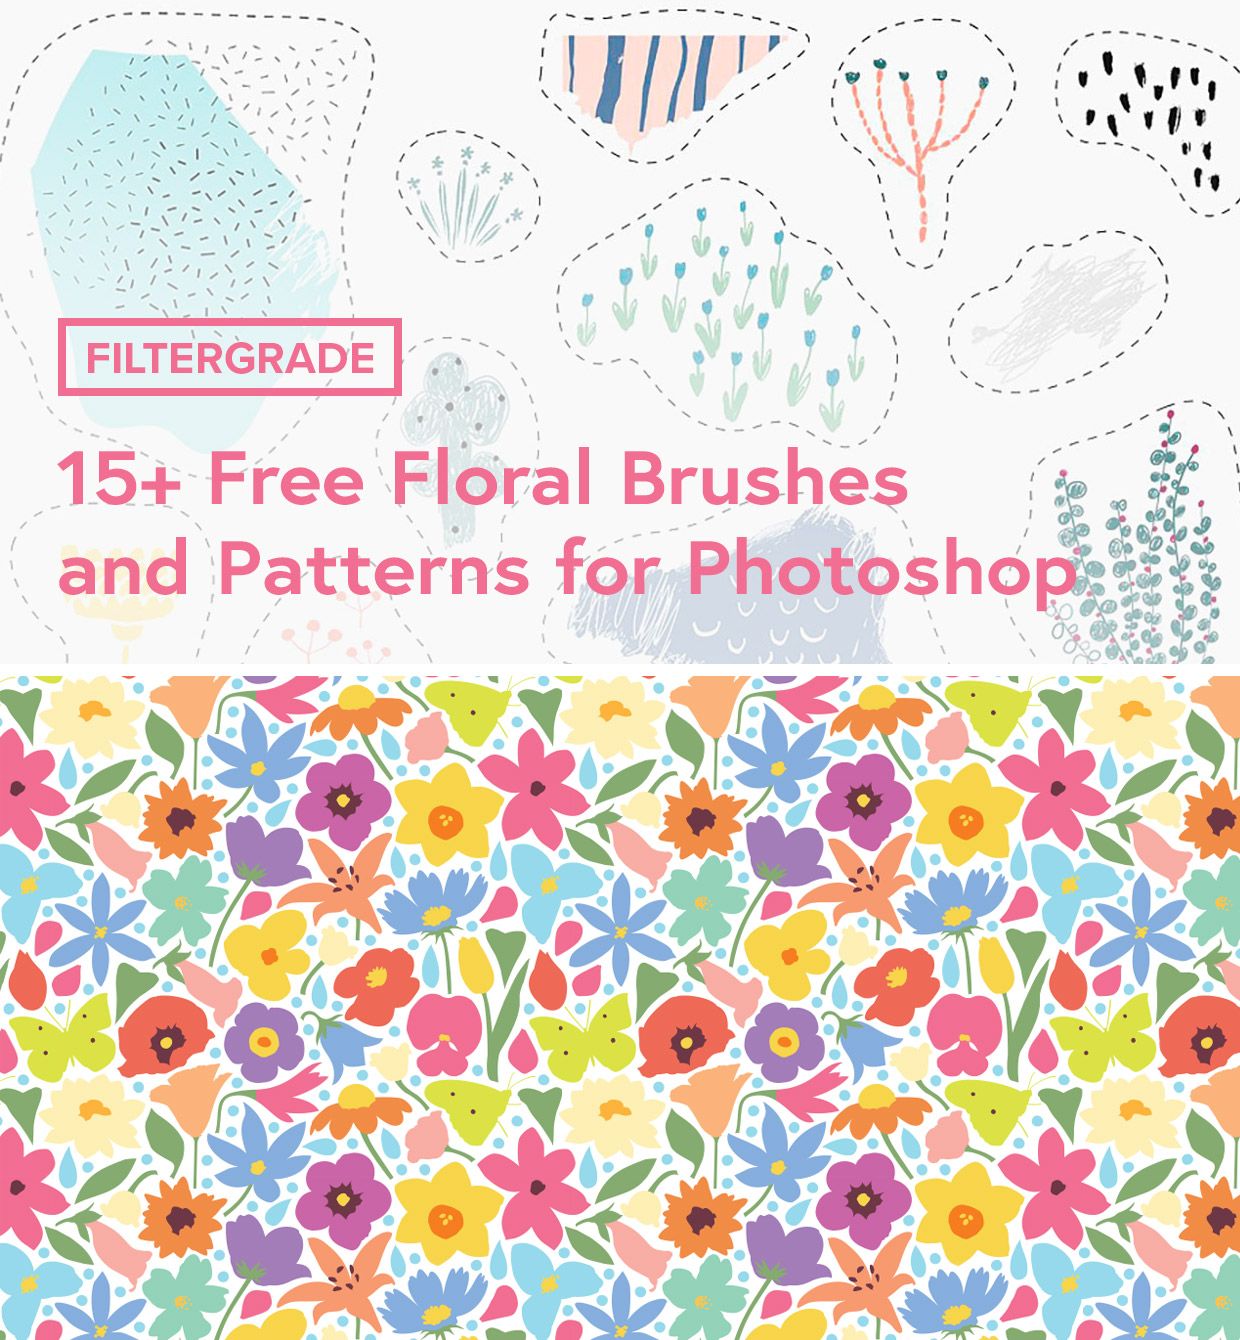 15 Free Floral Brushes And Patterns For Photoshop Filtergrade Photoshop Brushes Free Photoshop Brushes Photoshop